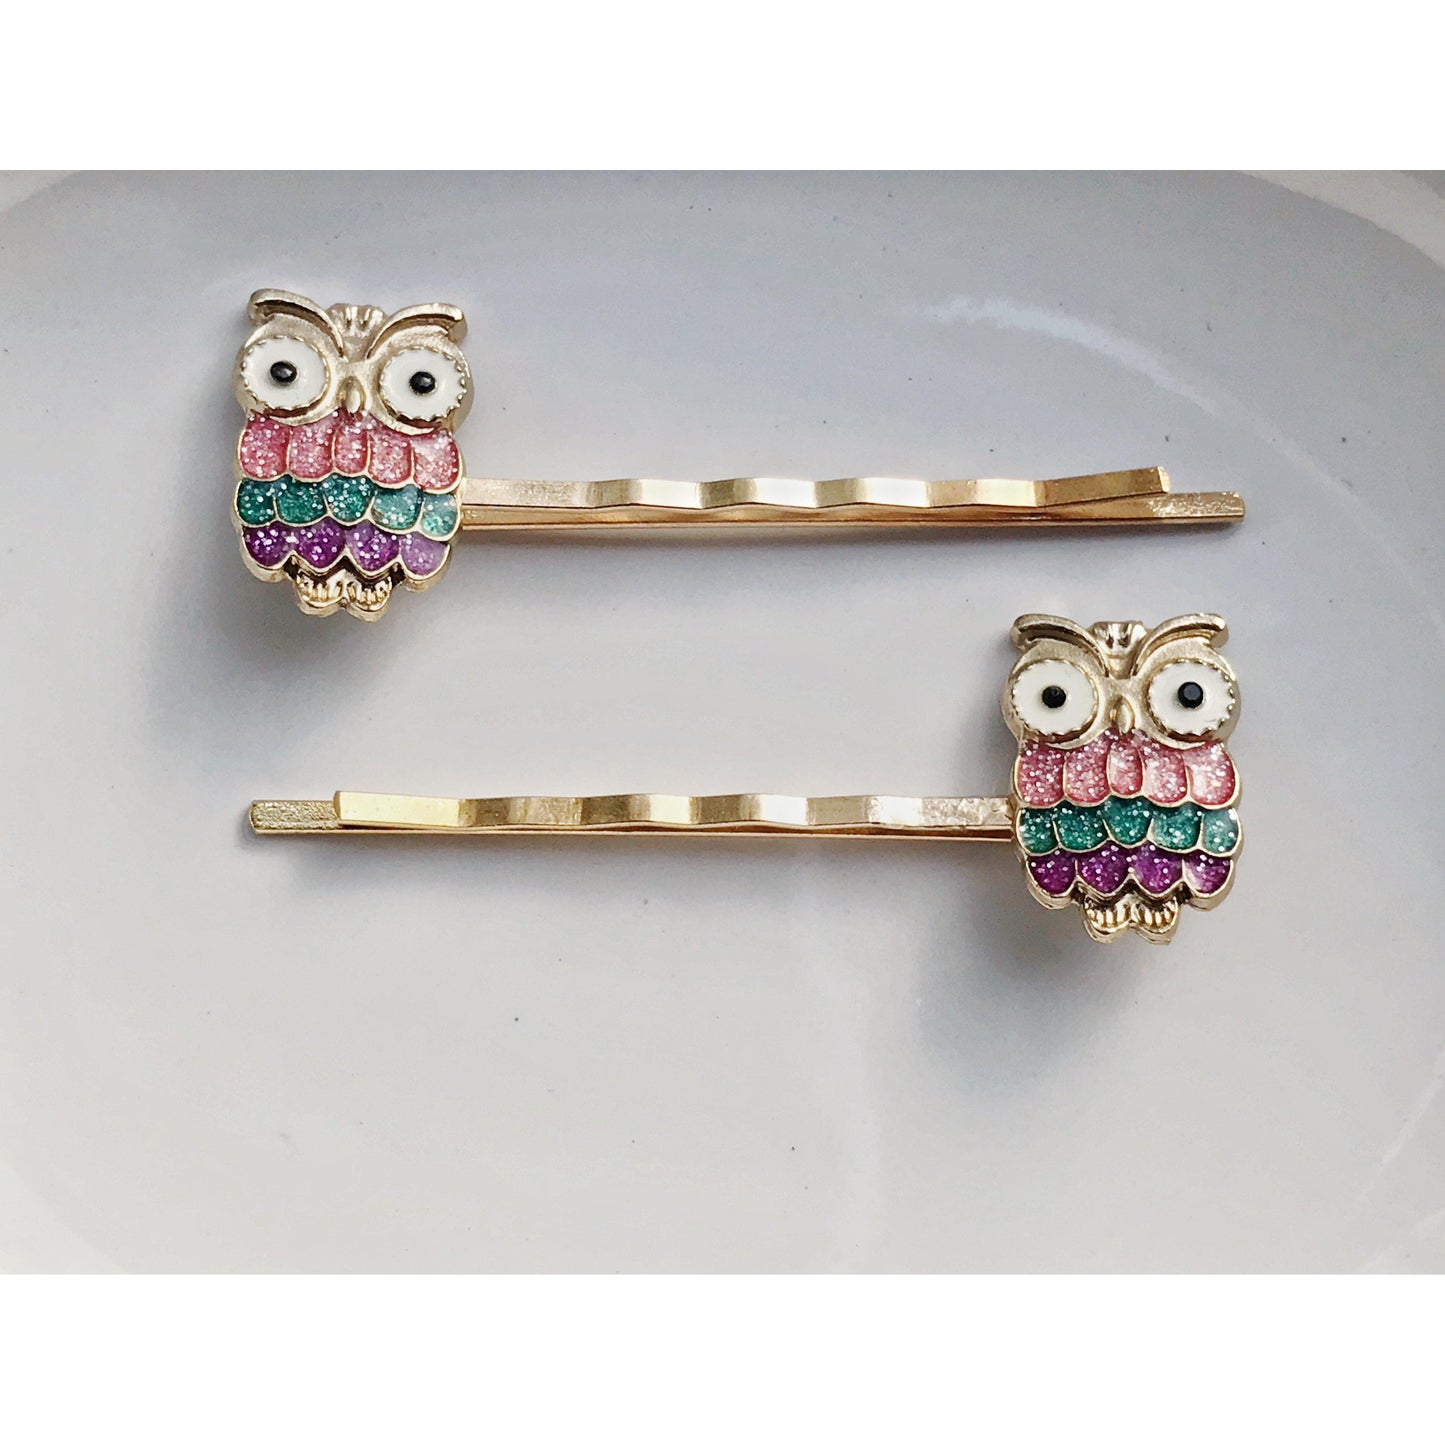 Pastel Owl Bobby Pins: Sparkling Owl Accents for Unique Hairstyles